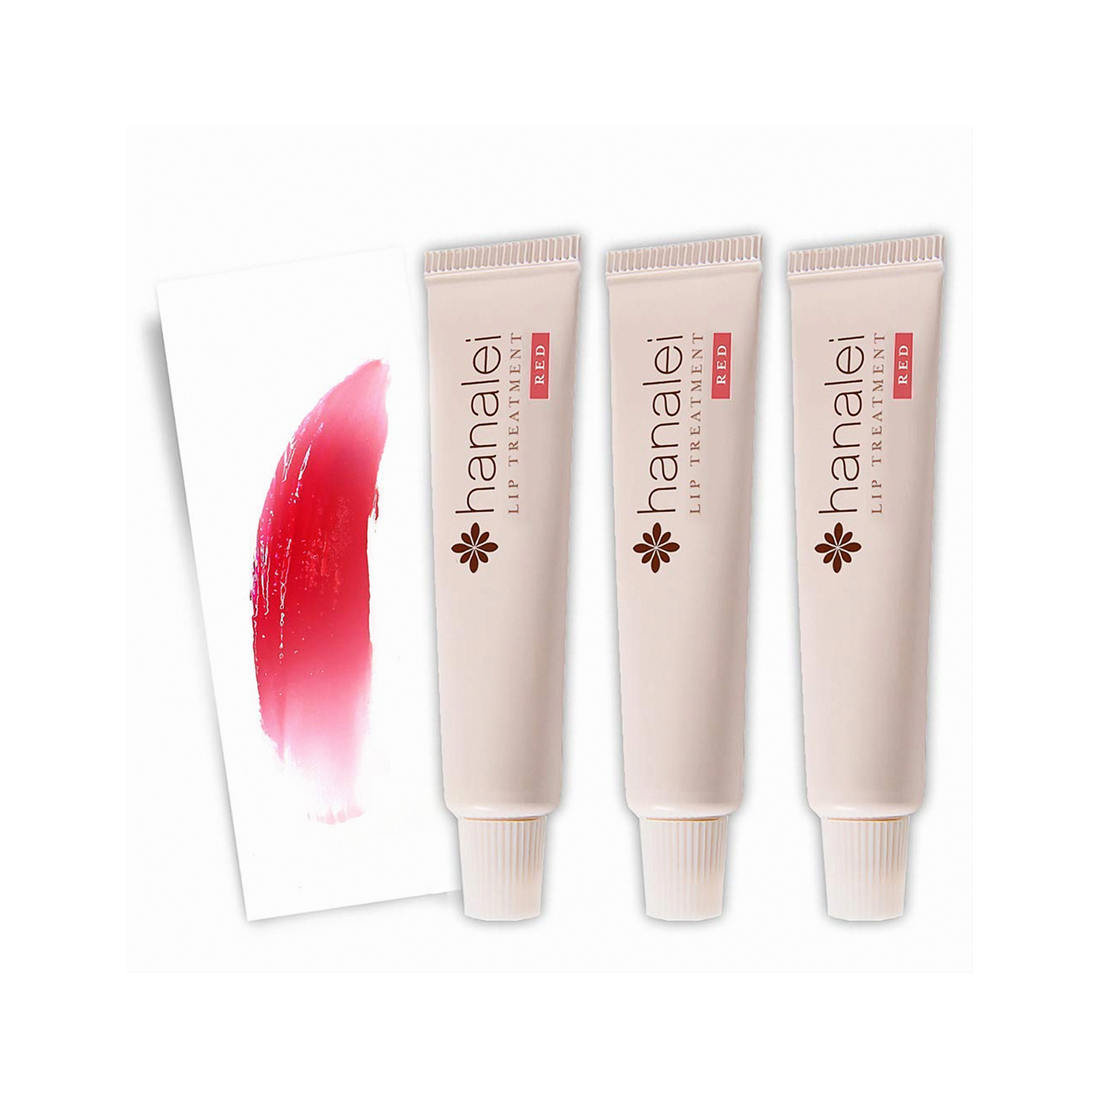 kukui oil lip treatment travel-size trio set (available in 5 shades)